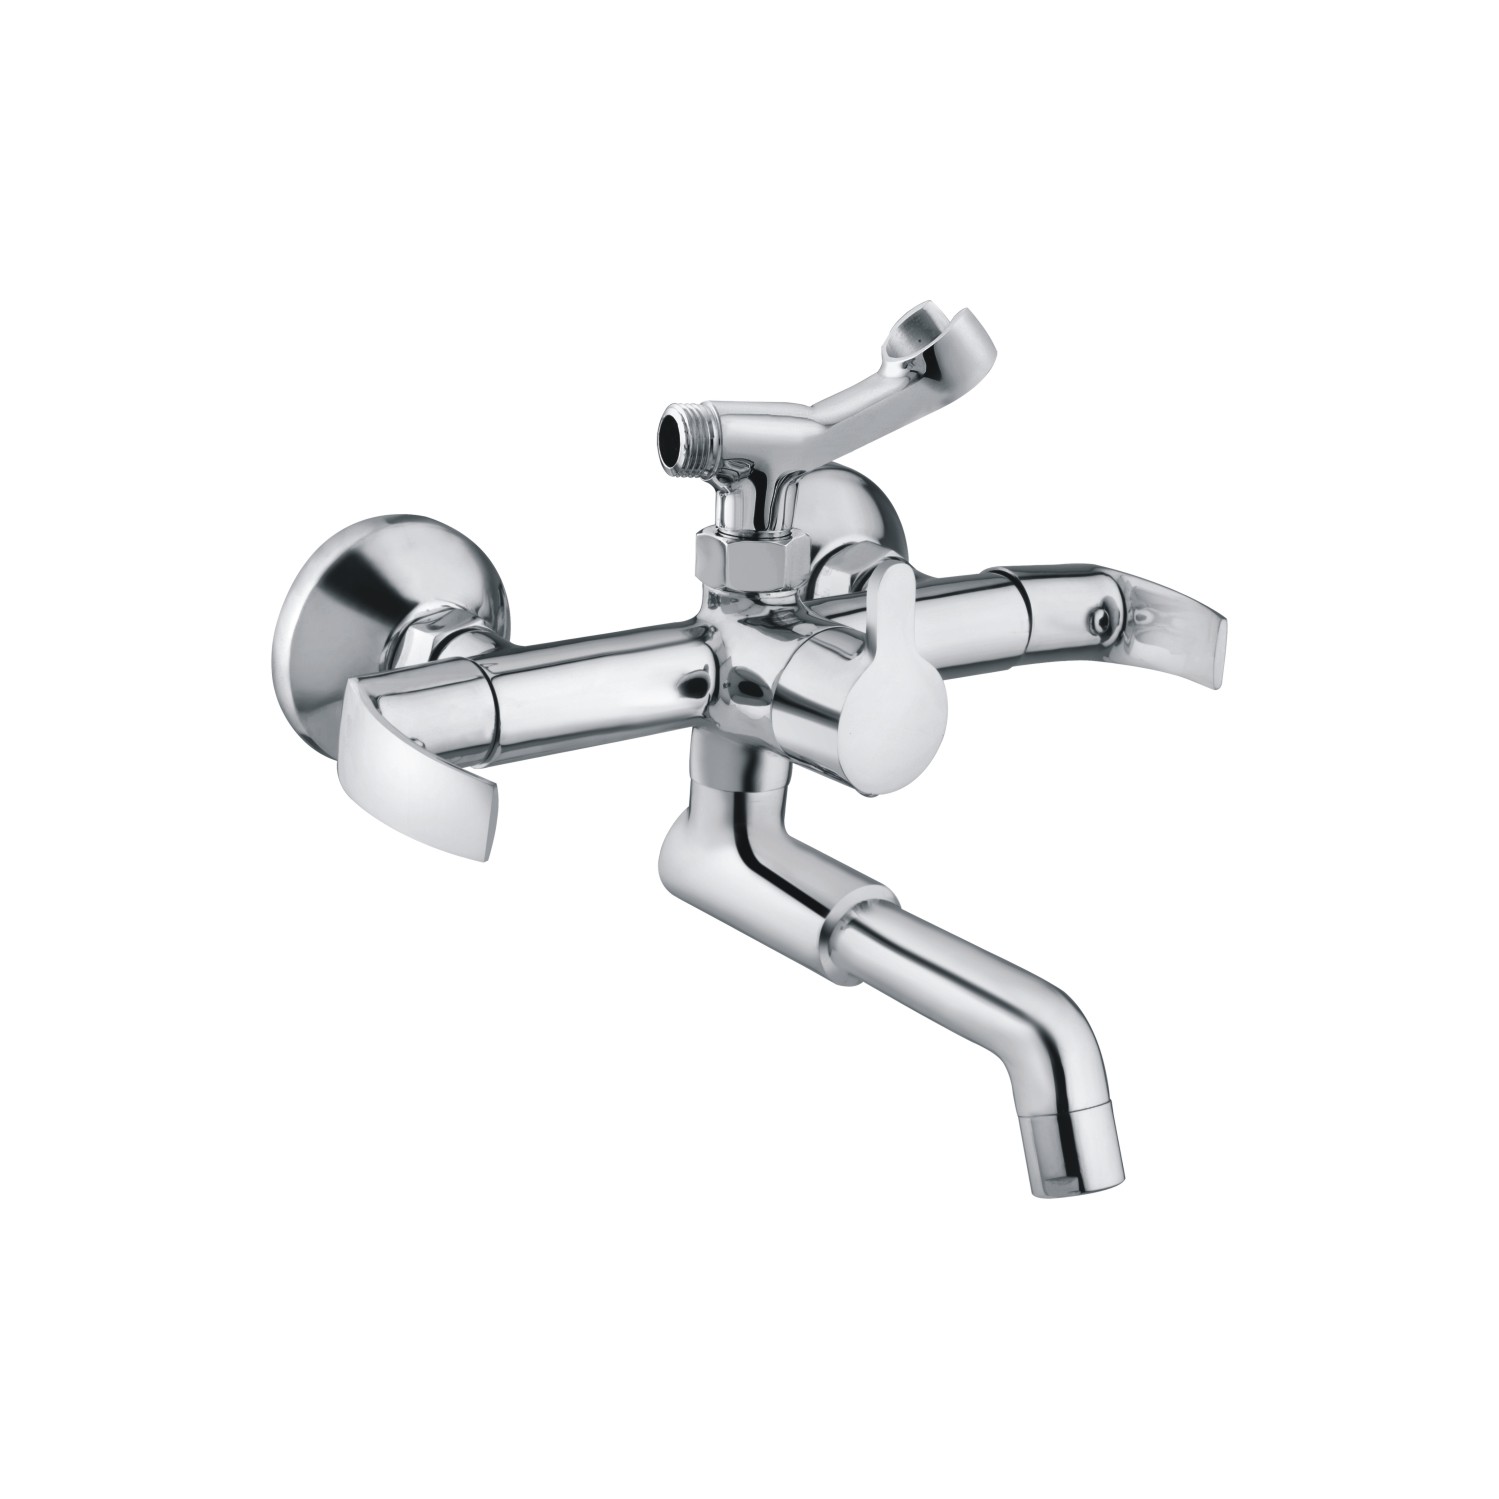 Quink Wall Mixer with Crutch